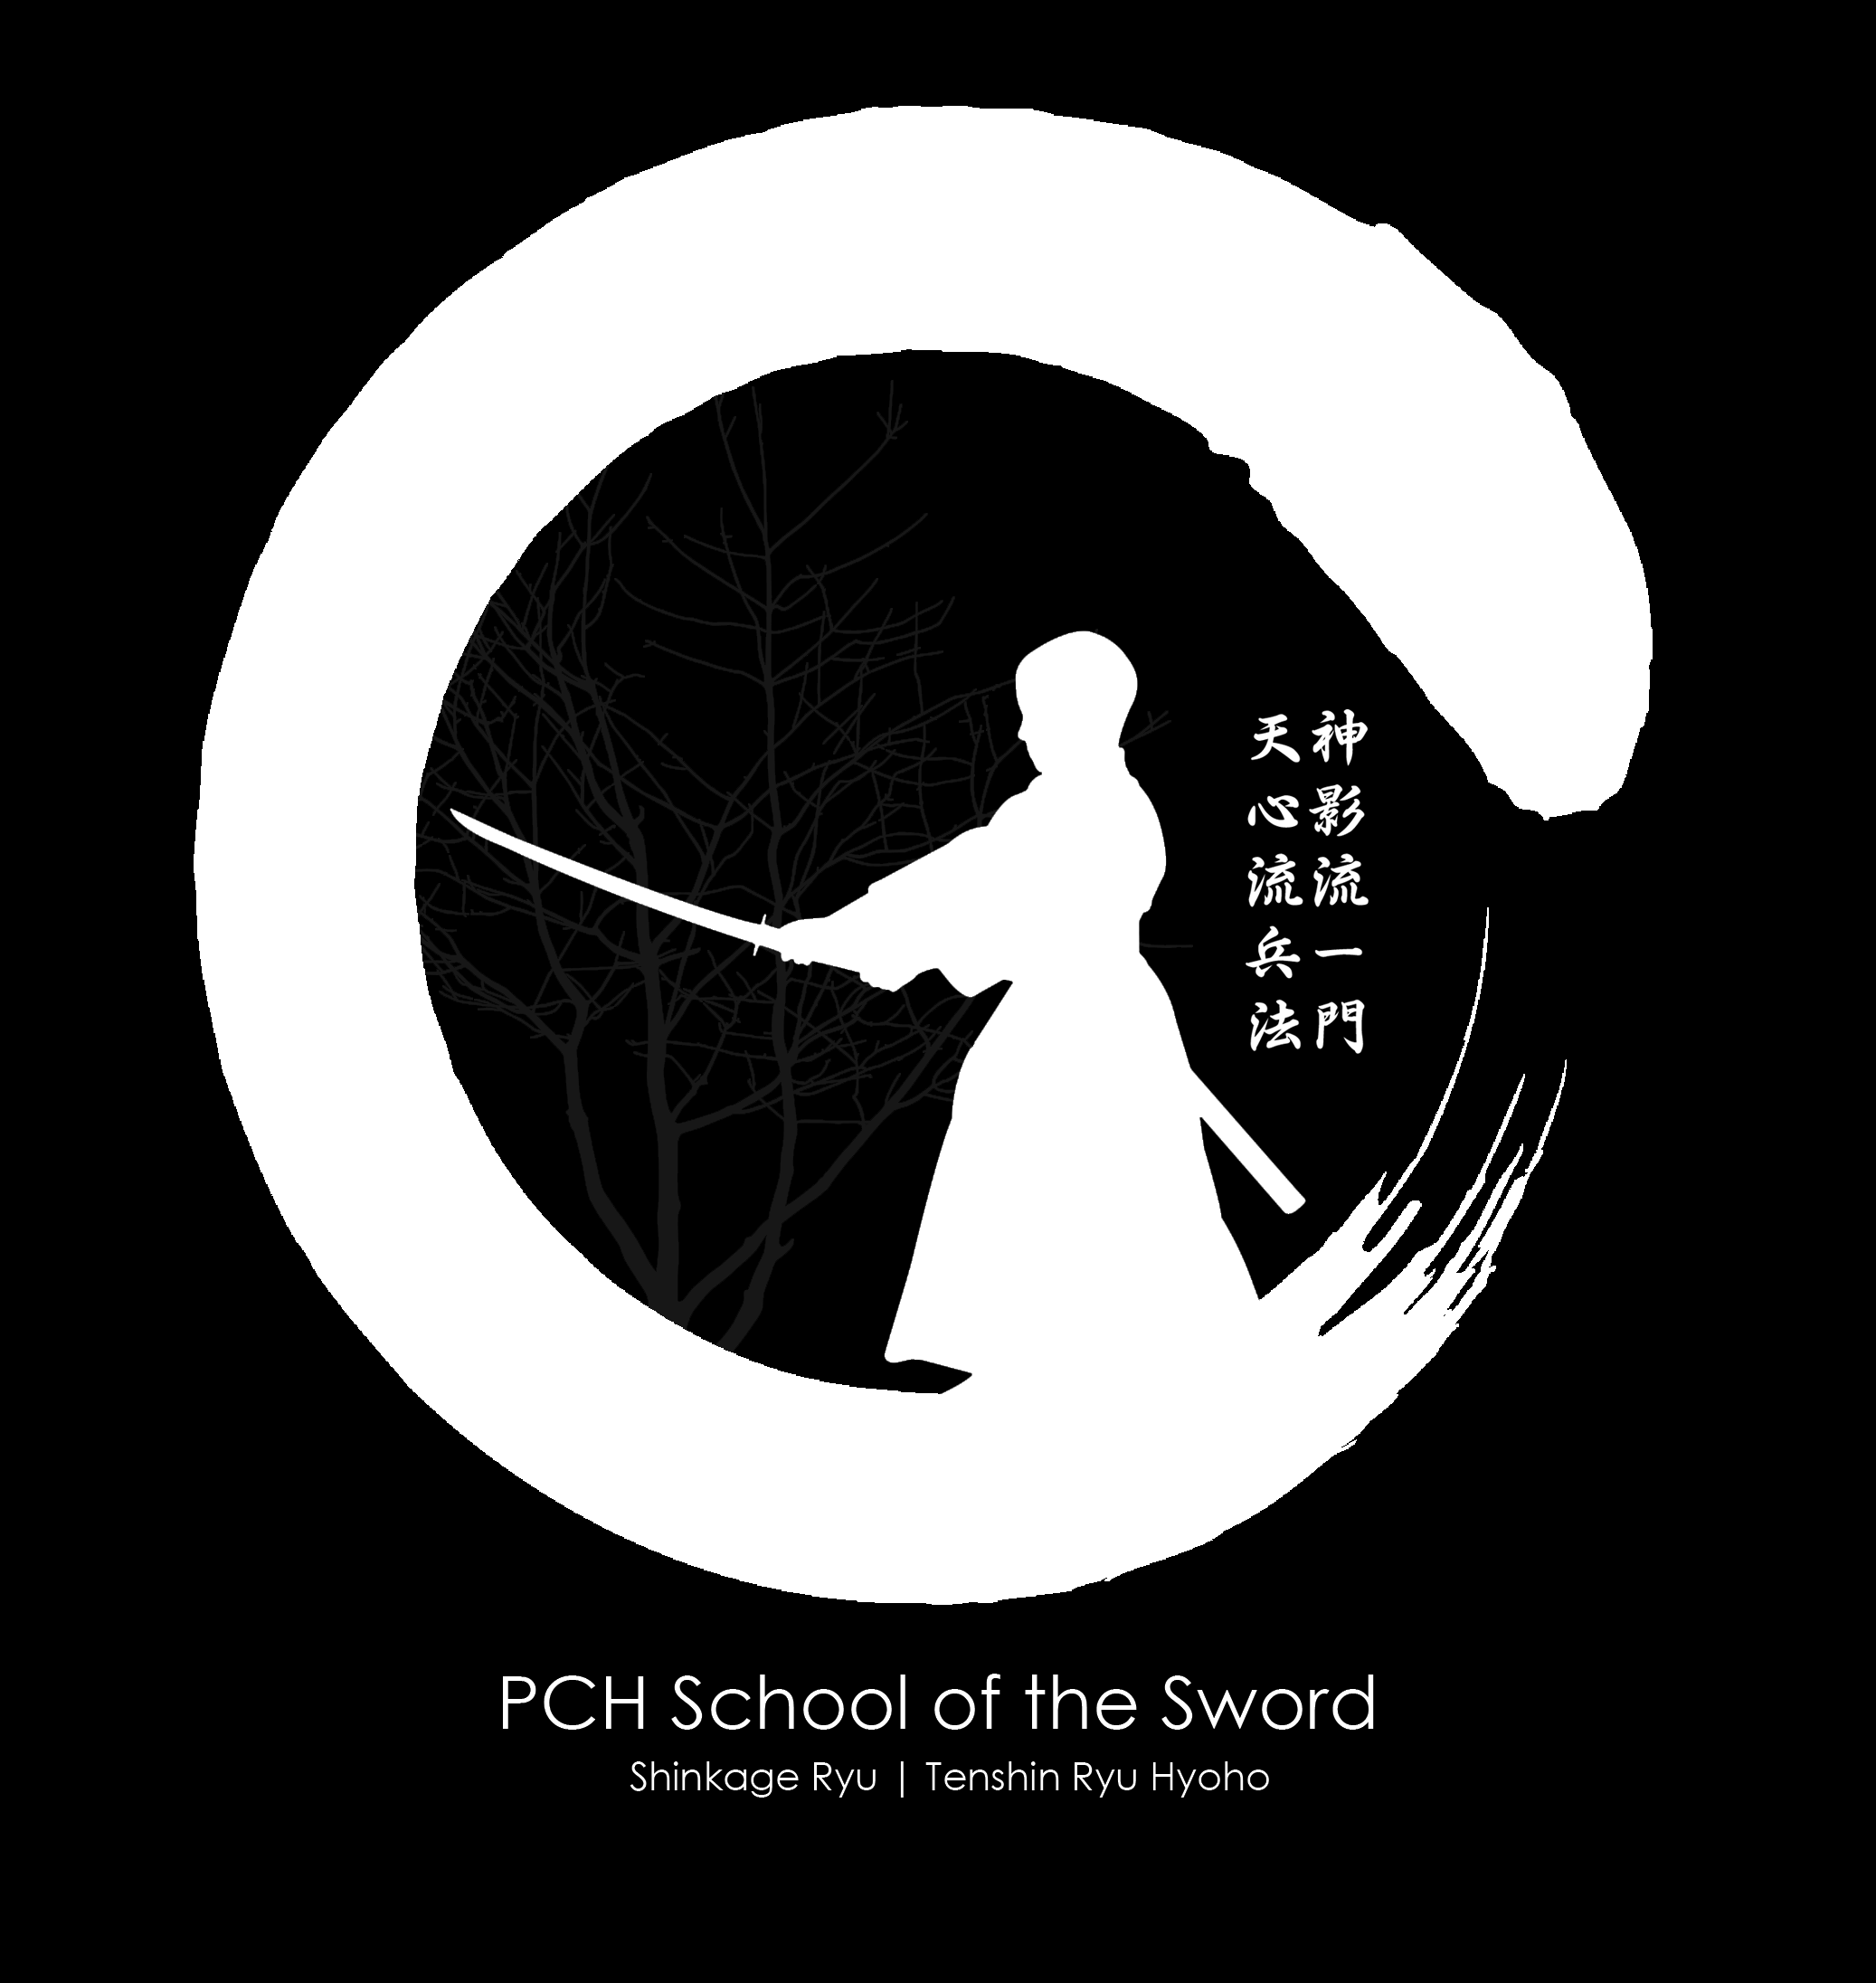 PCH School of the Sword